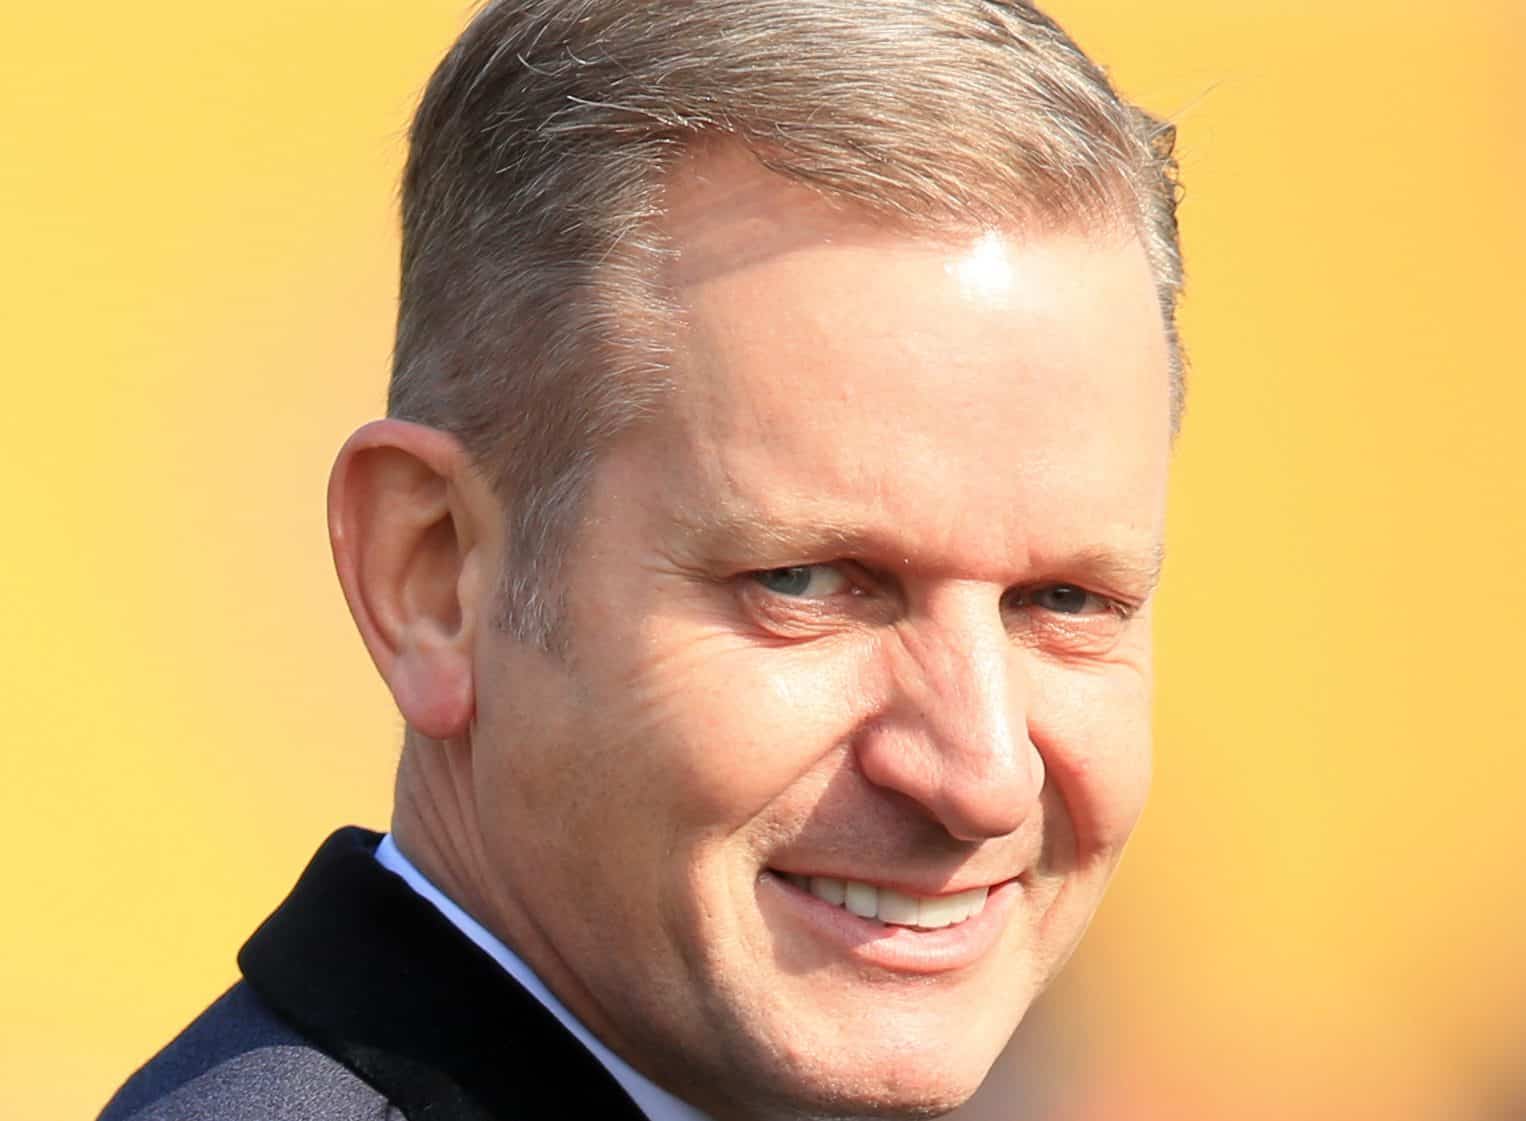 Jeremy Kyle slammed for complaining he’s been ‘cancelled’ as he promotes new project